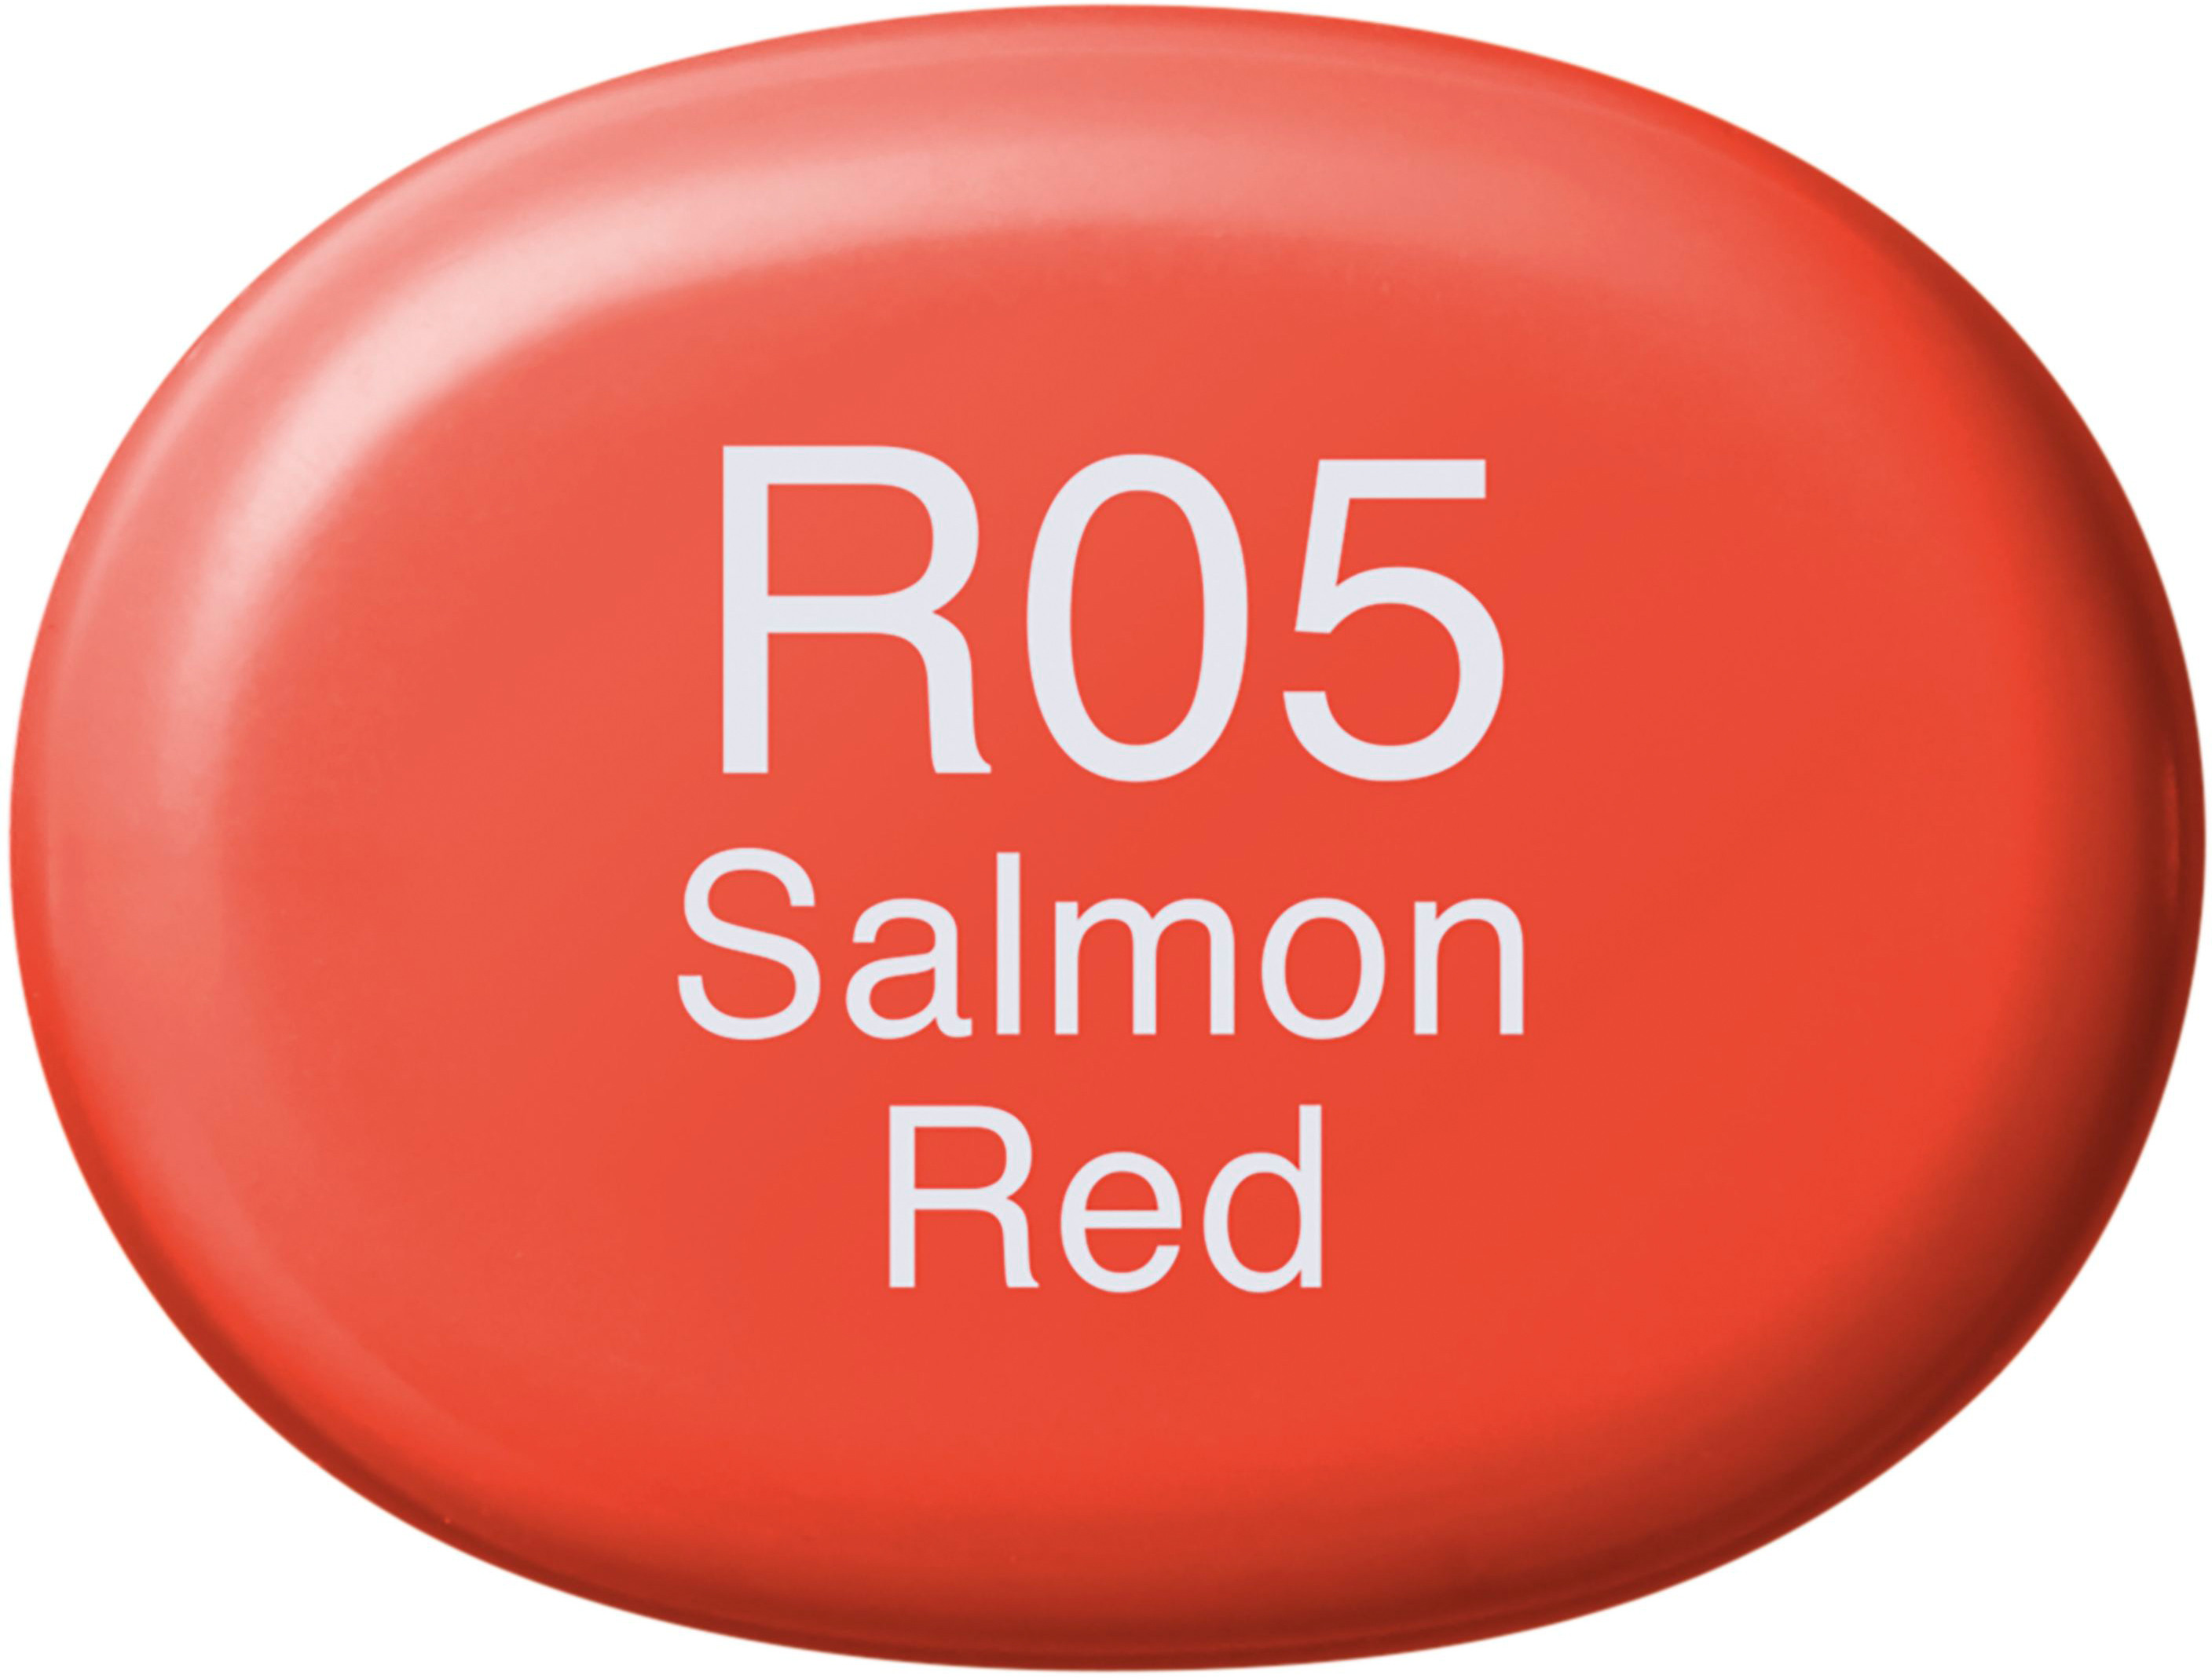 COPIC Marker Sketch 21075184 R05 - Salmon Red